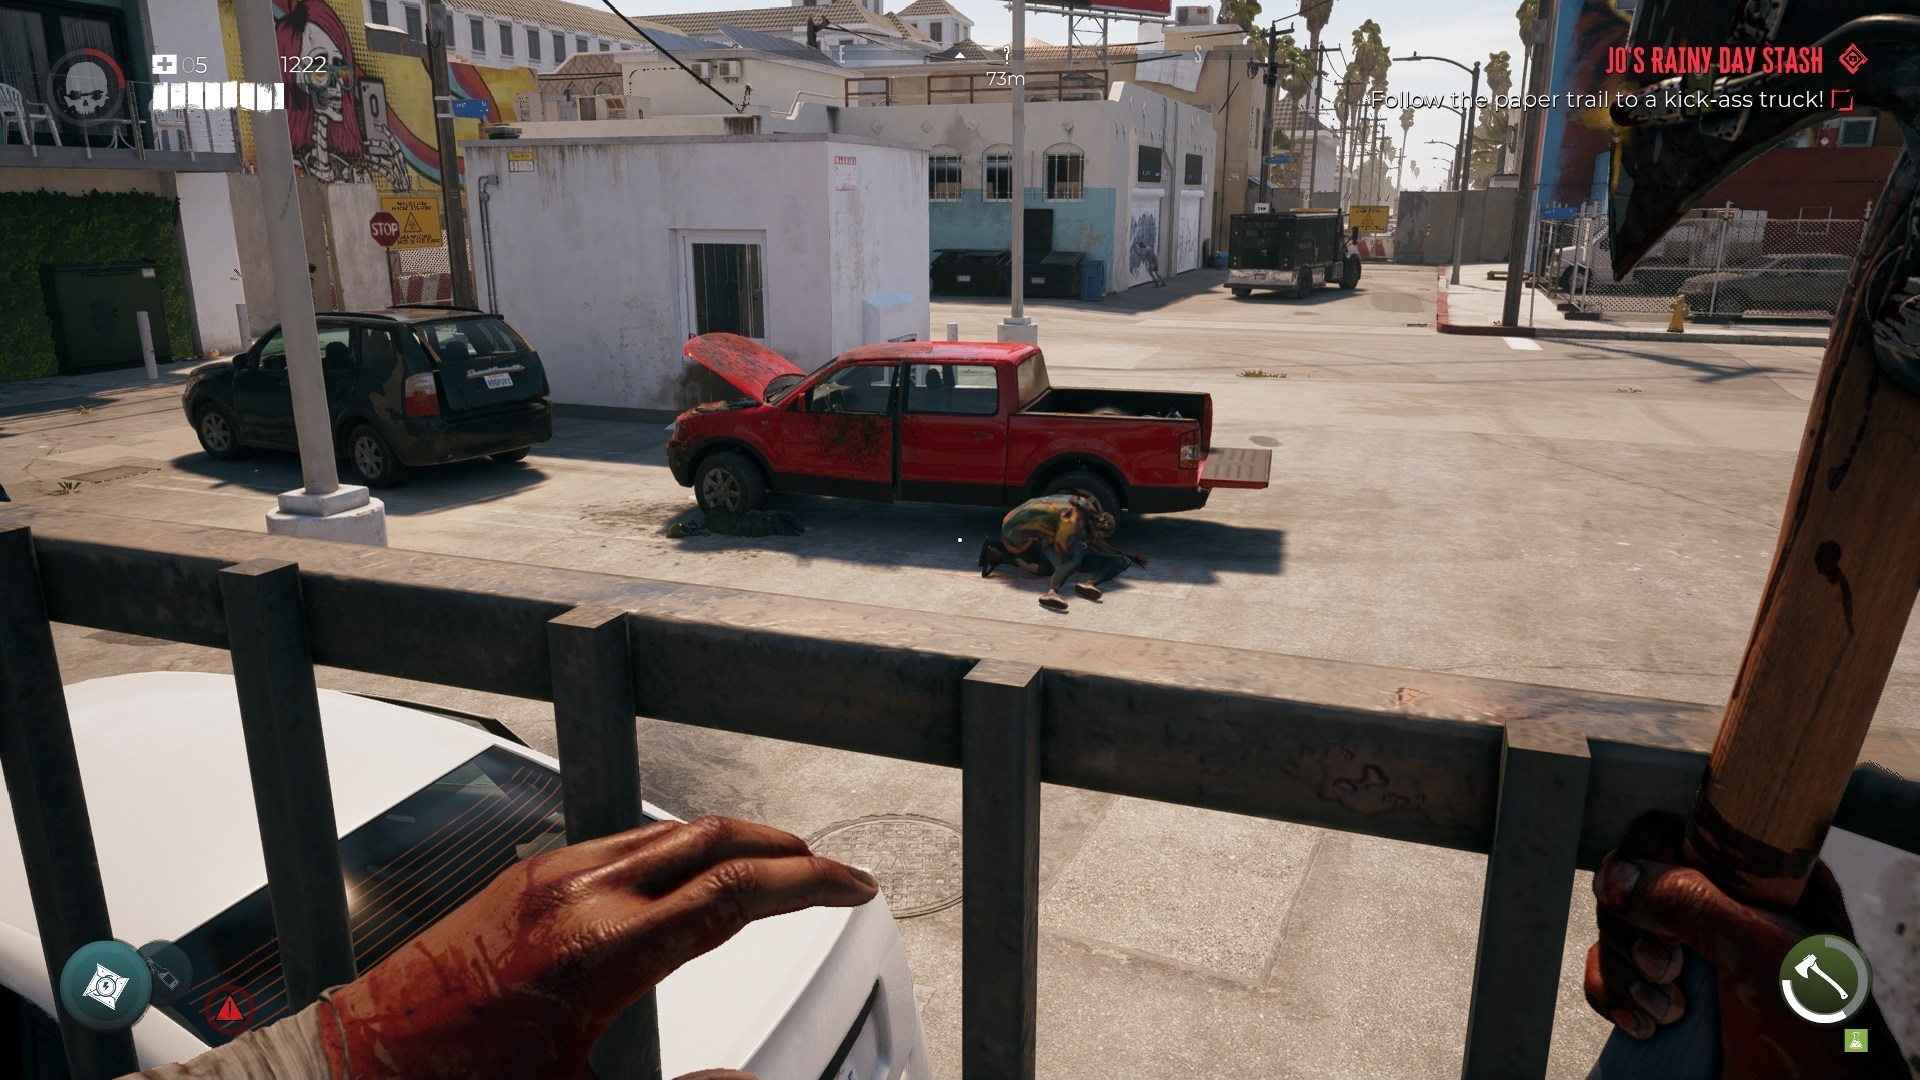 Dead Island 2 screenshot depecting zombies crowding around a red pickup truck over a chain link fence